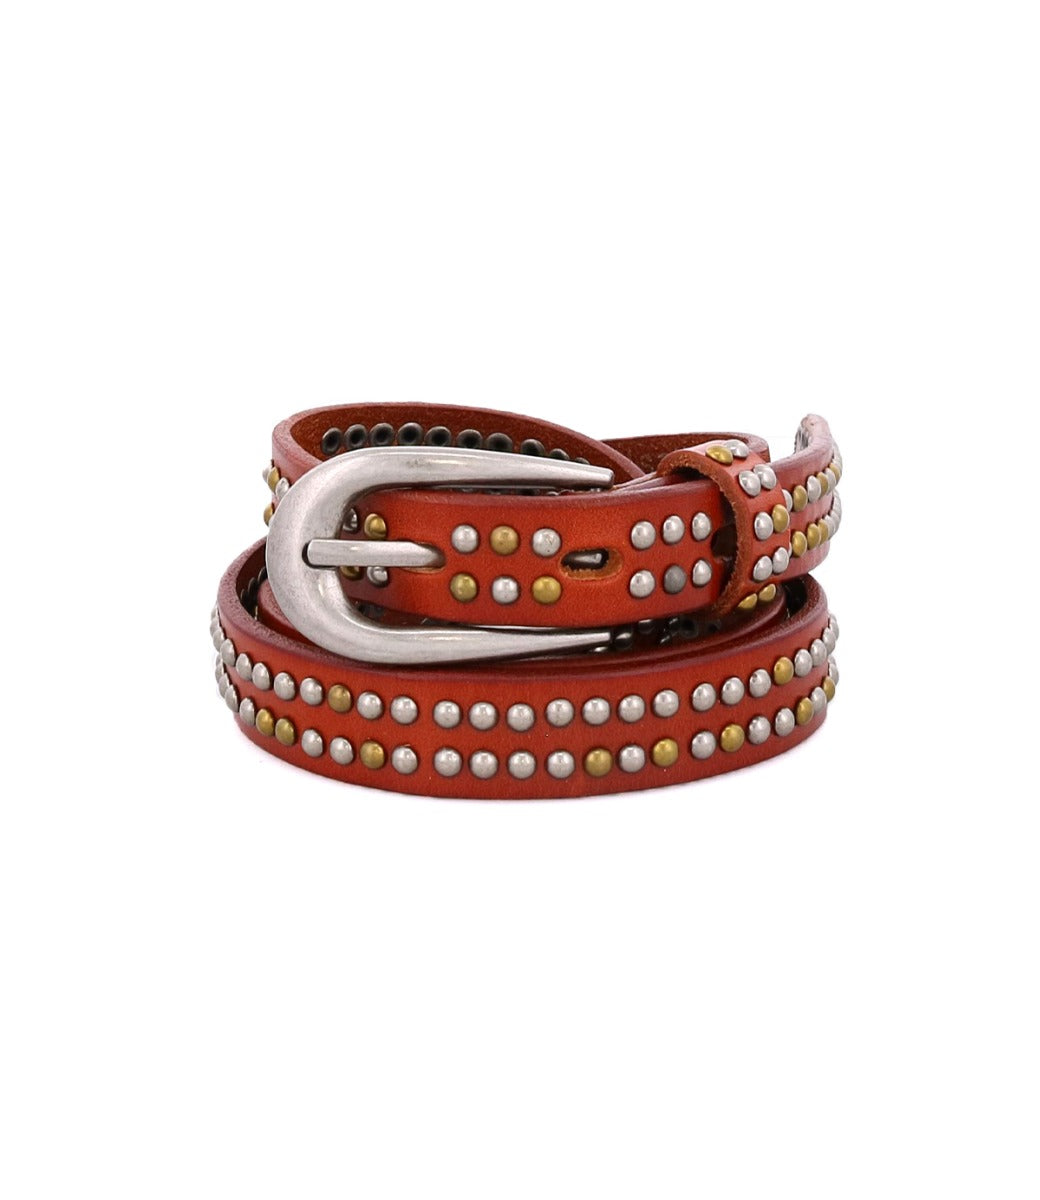 A Rico red leather belt with silver studding by Bed Stu.